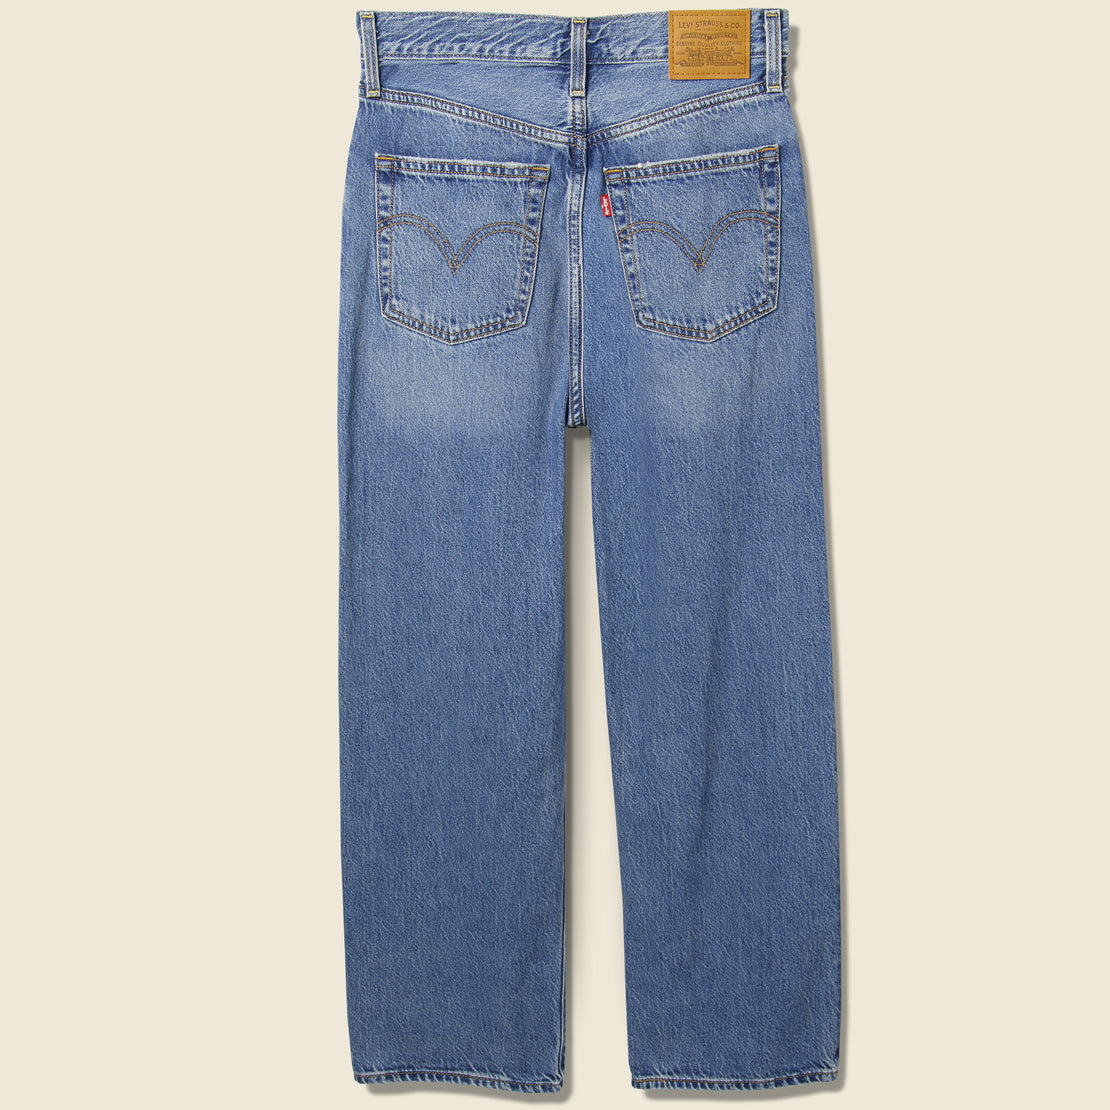 Ribcage Straight Ankle Jean - At The Ready - Levis Premium - STAG Provisions - W - Pants - Denim